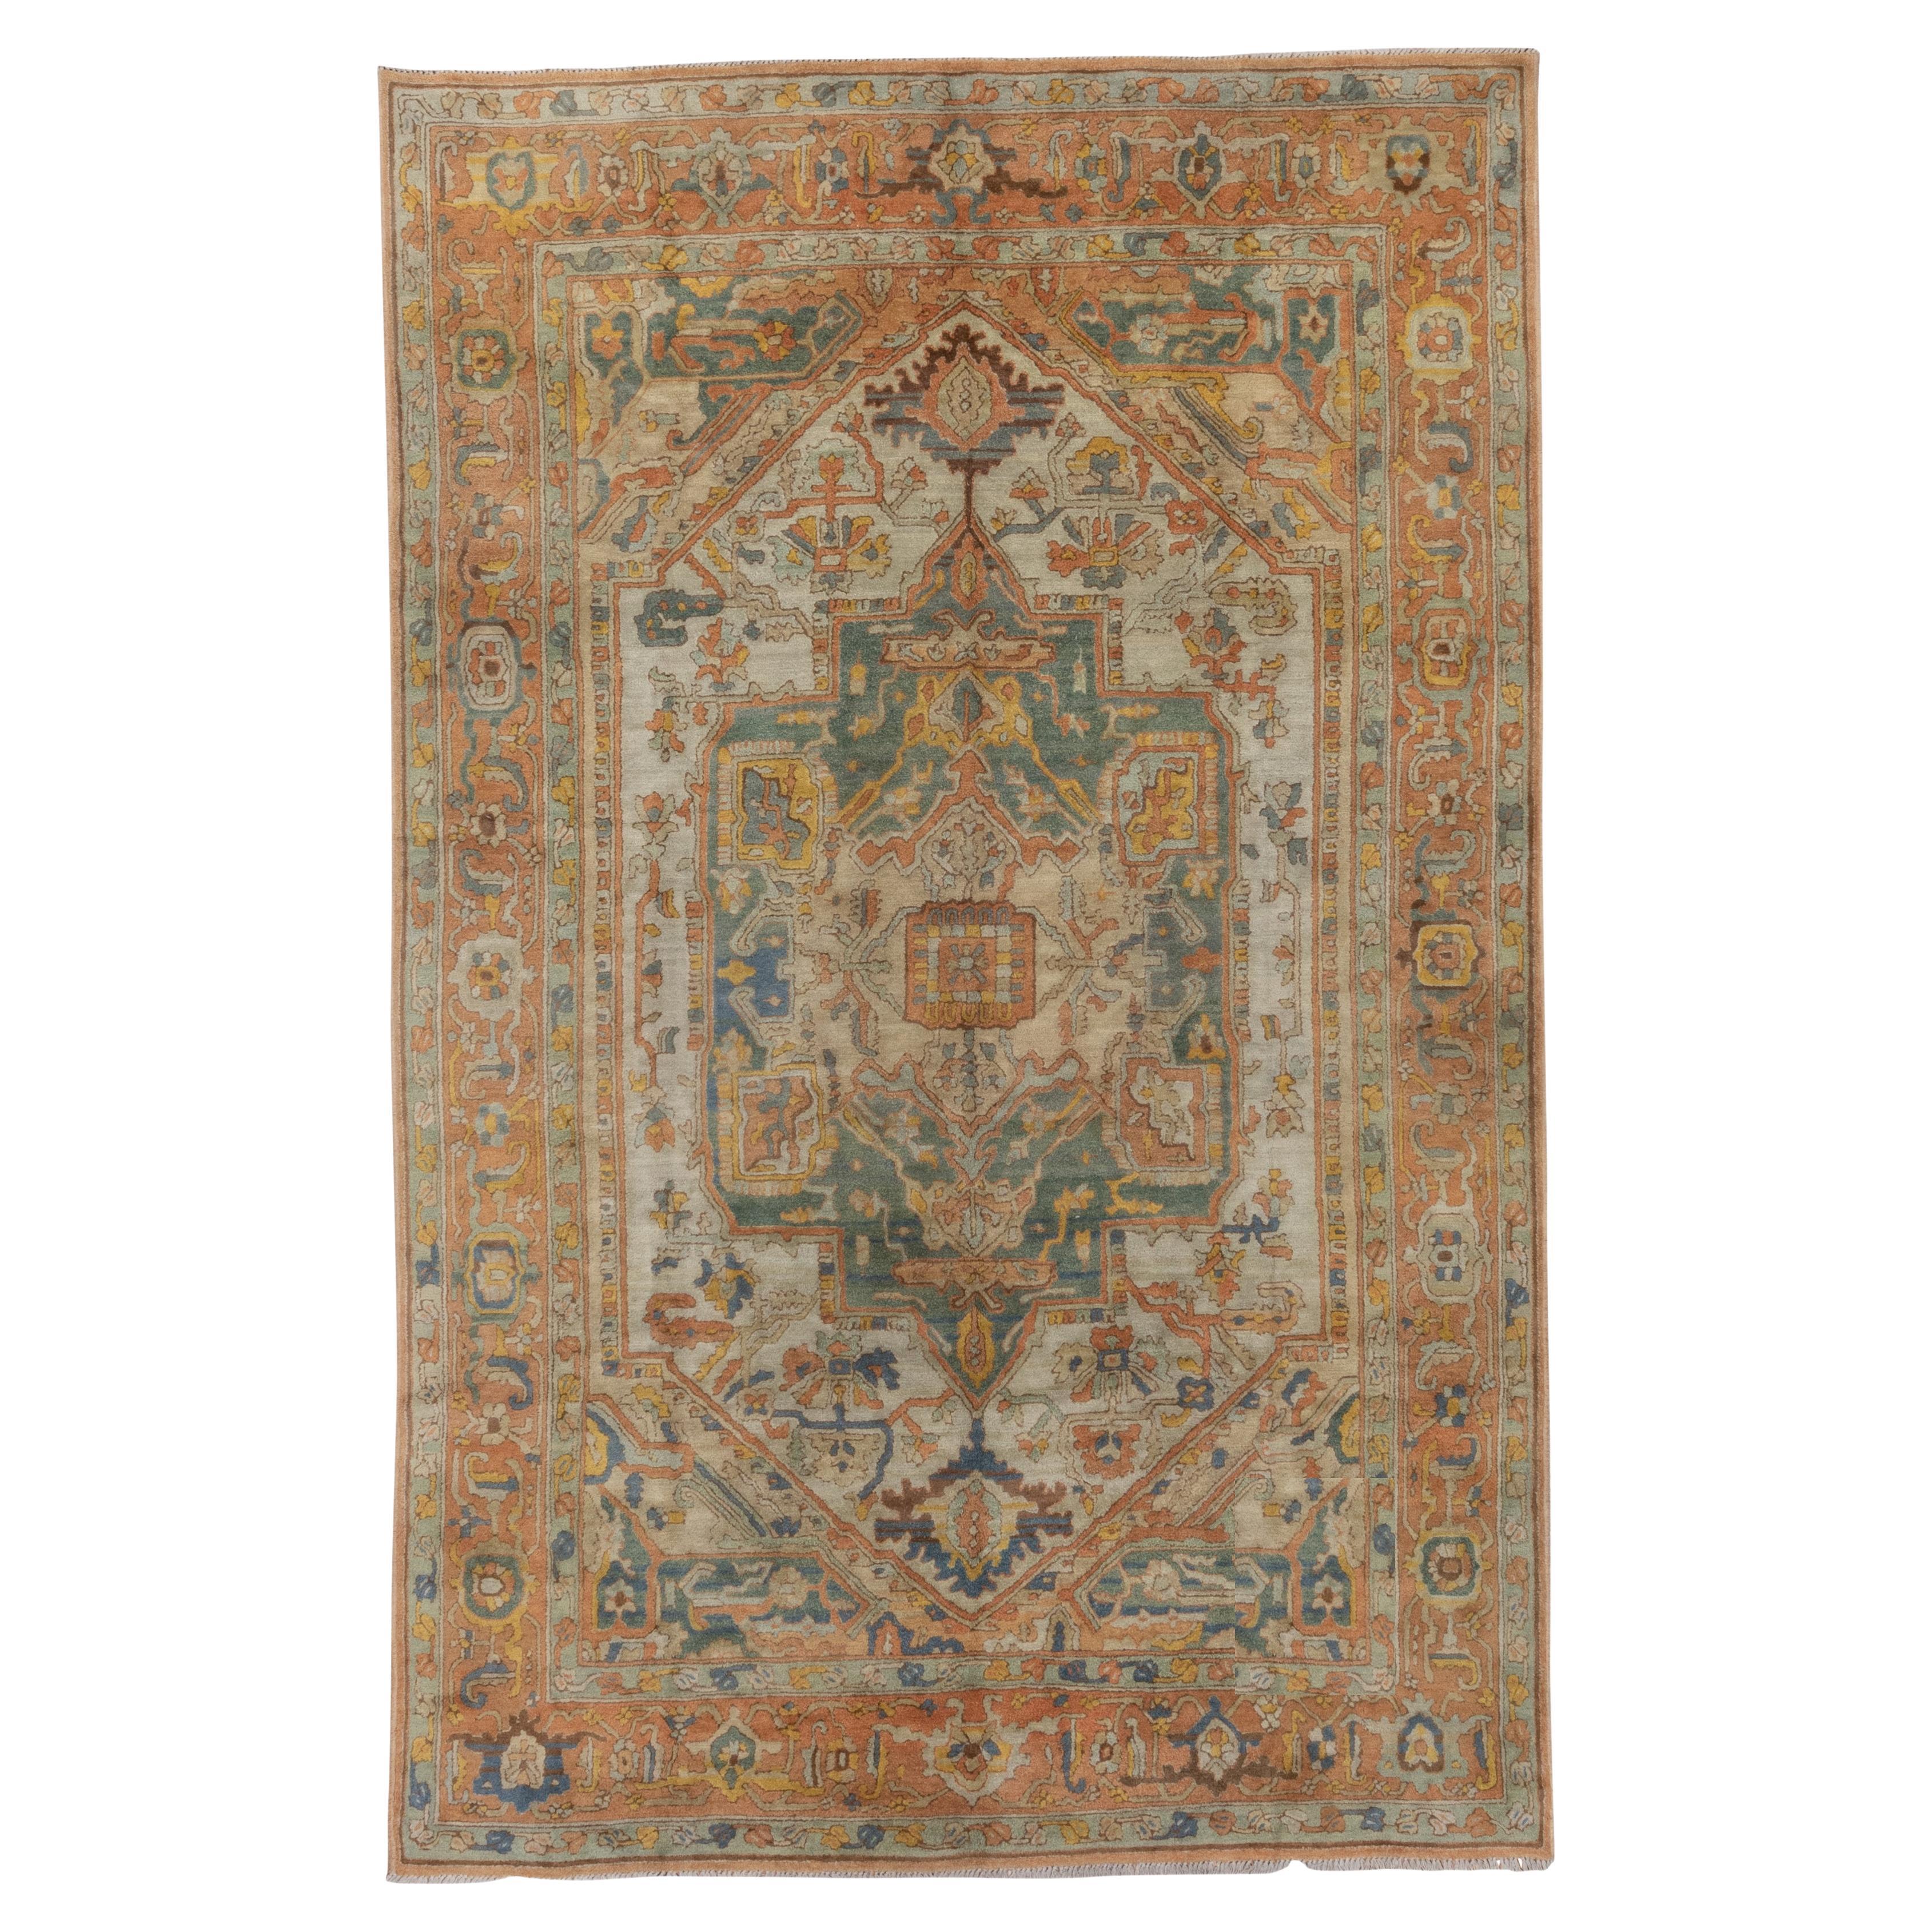 Hooked Rug in Ancient Orange with Elaborate Central Medallion For Sale